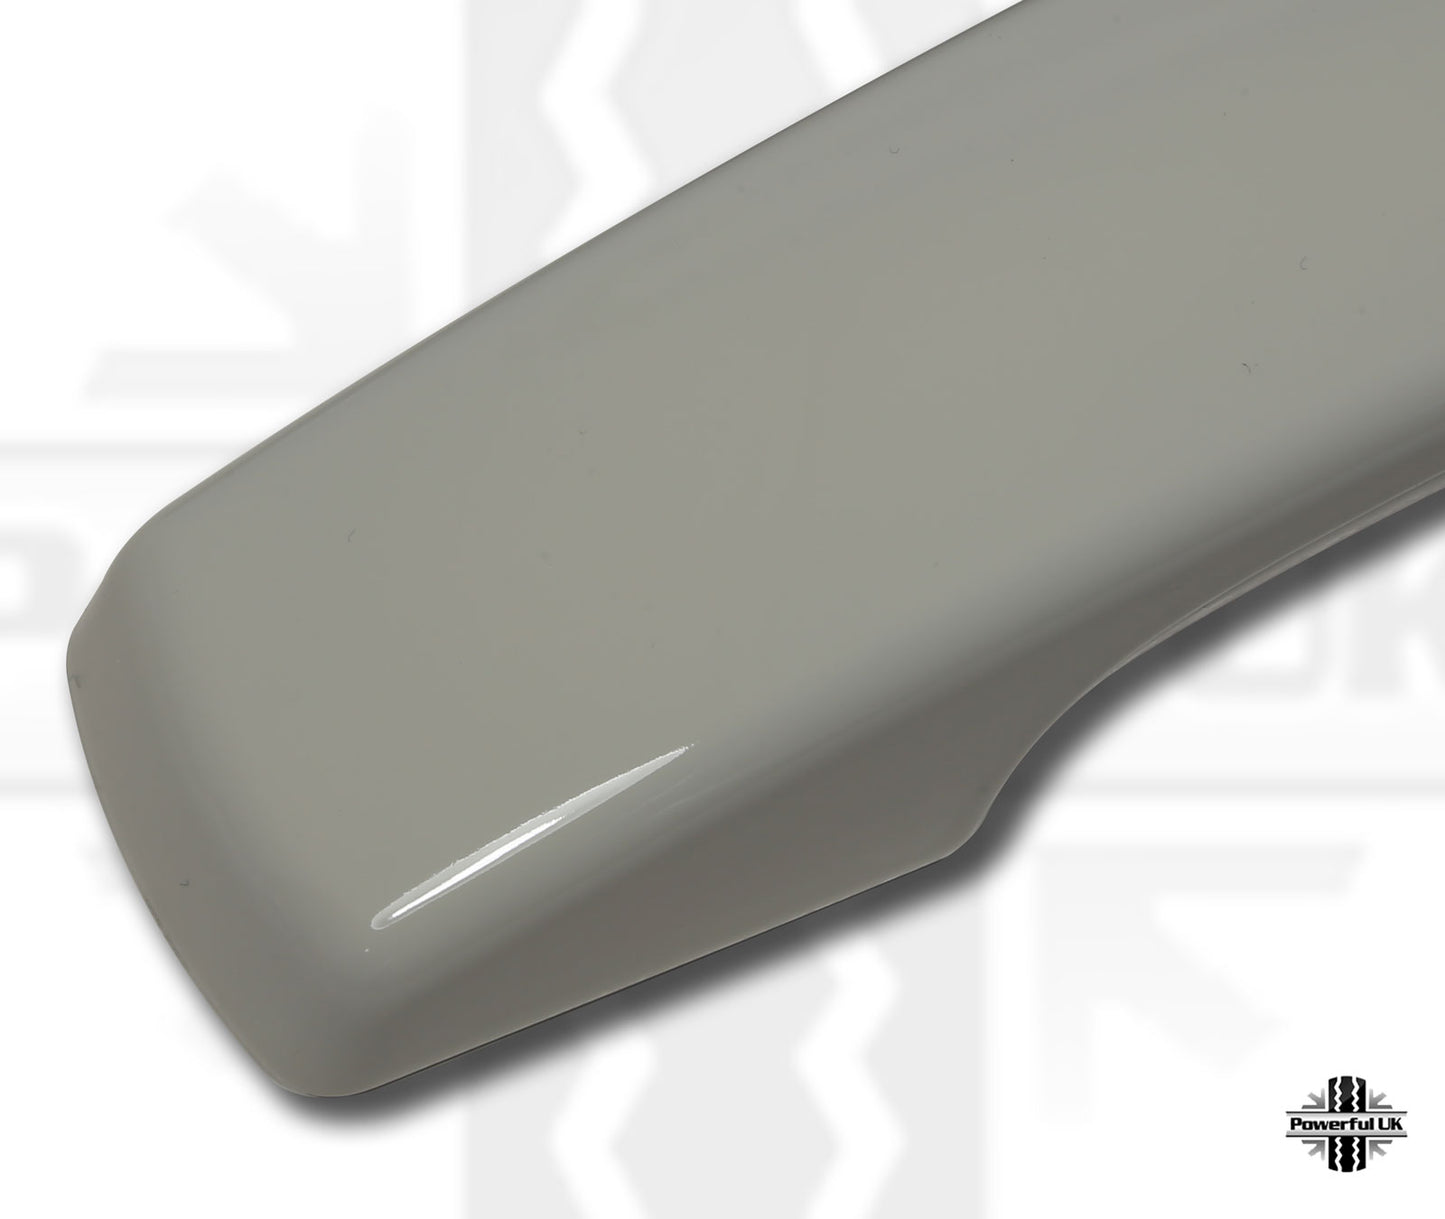 Door Handle "Skins" for Land Rover Discovery 3 fitted with 2 pc Handle - Alaska White